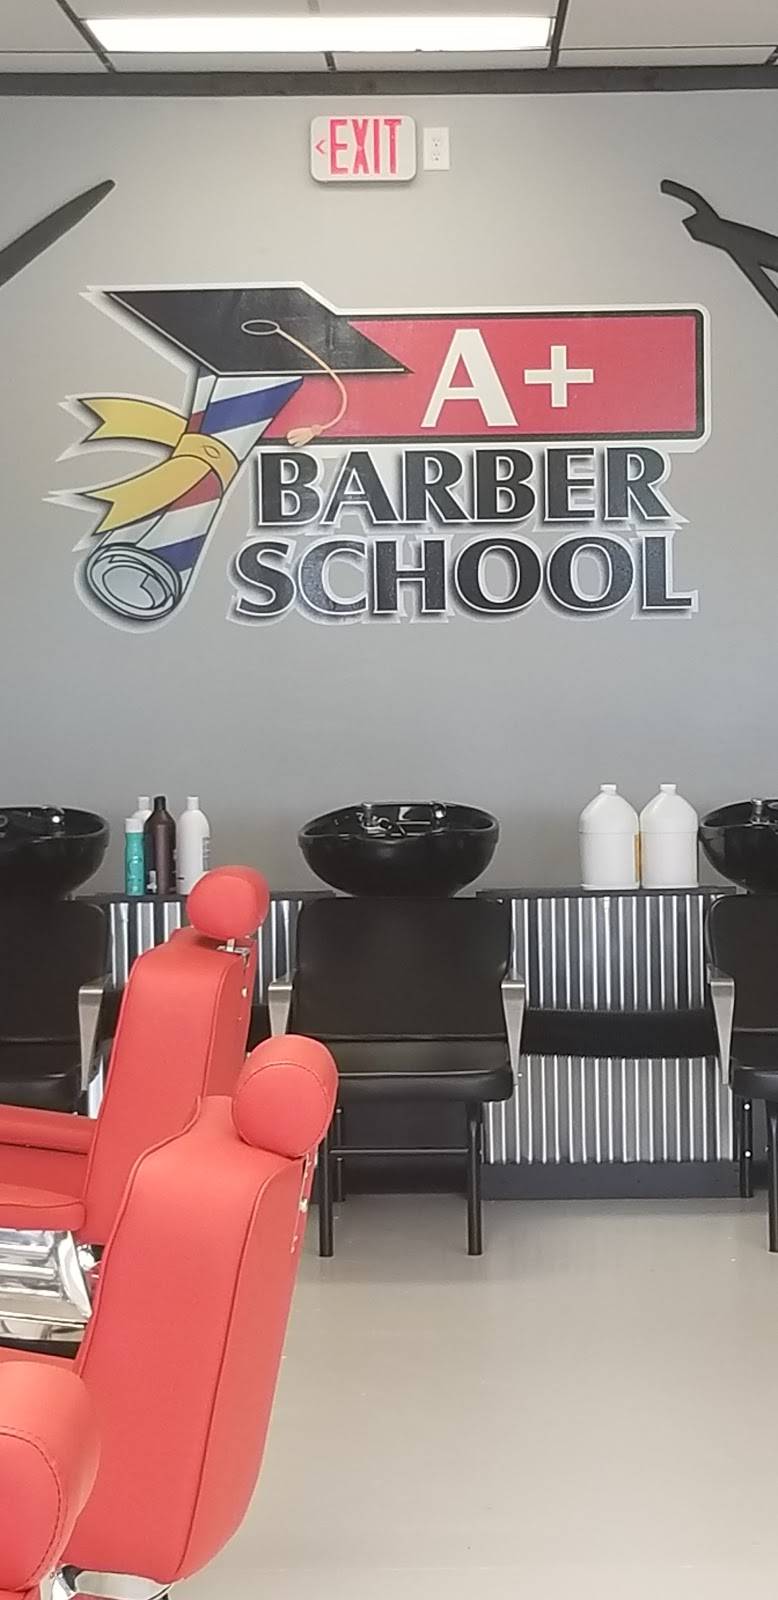 A+ Barber School Inc - hair care  | Photo 2 of 4 | Address: 7411 Heathrow Way Suite E, Indianapolis, IN 46241, USA | Phone: (317) 455-9752